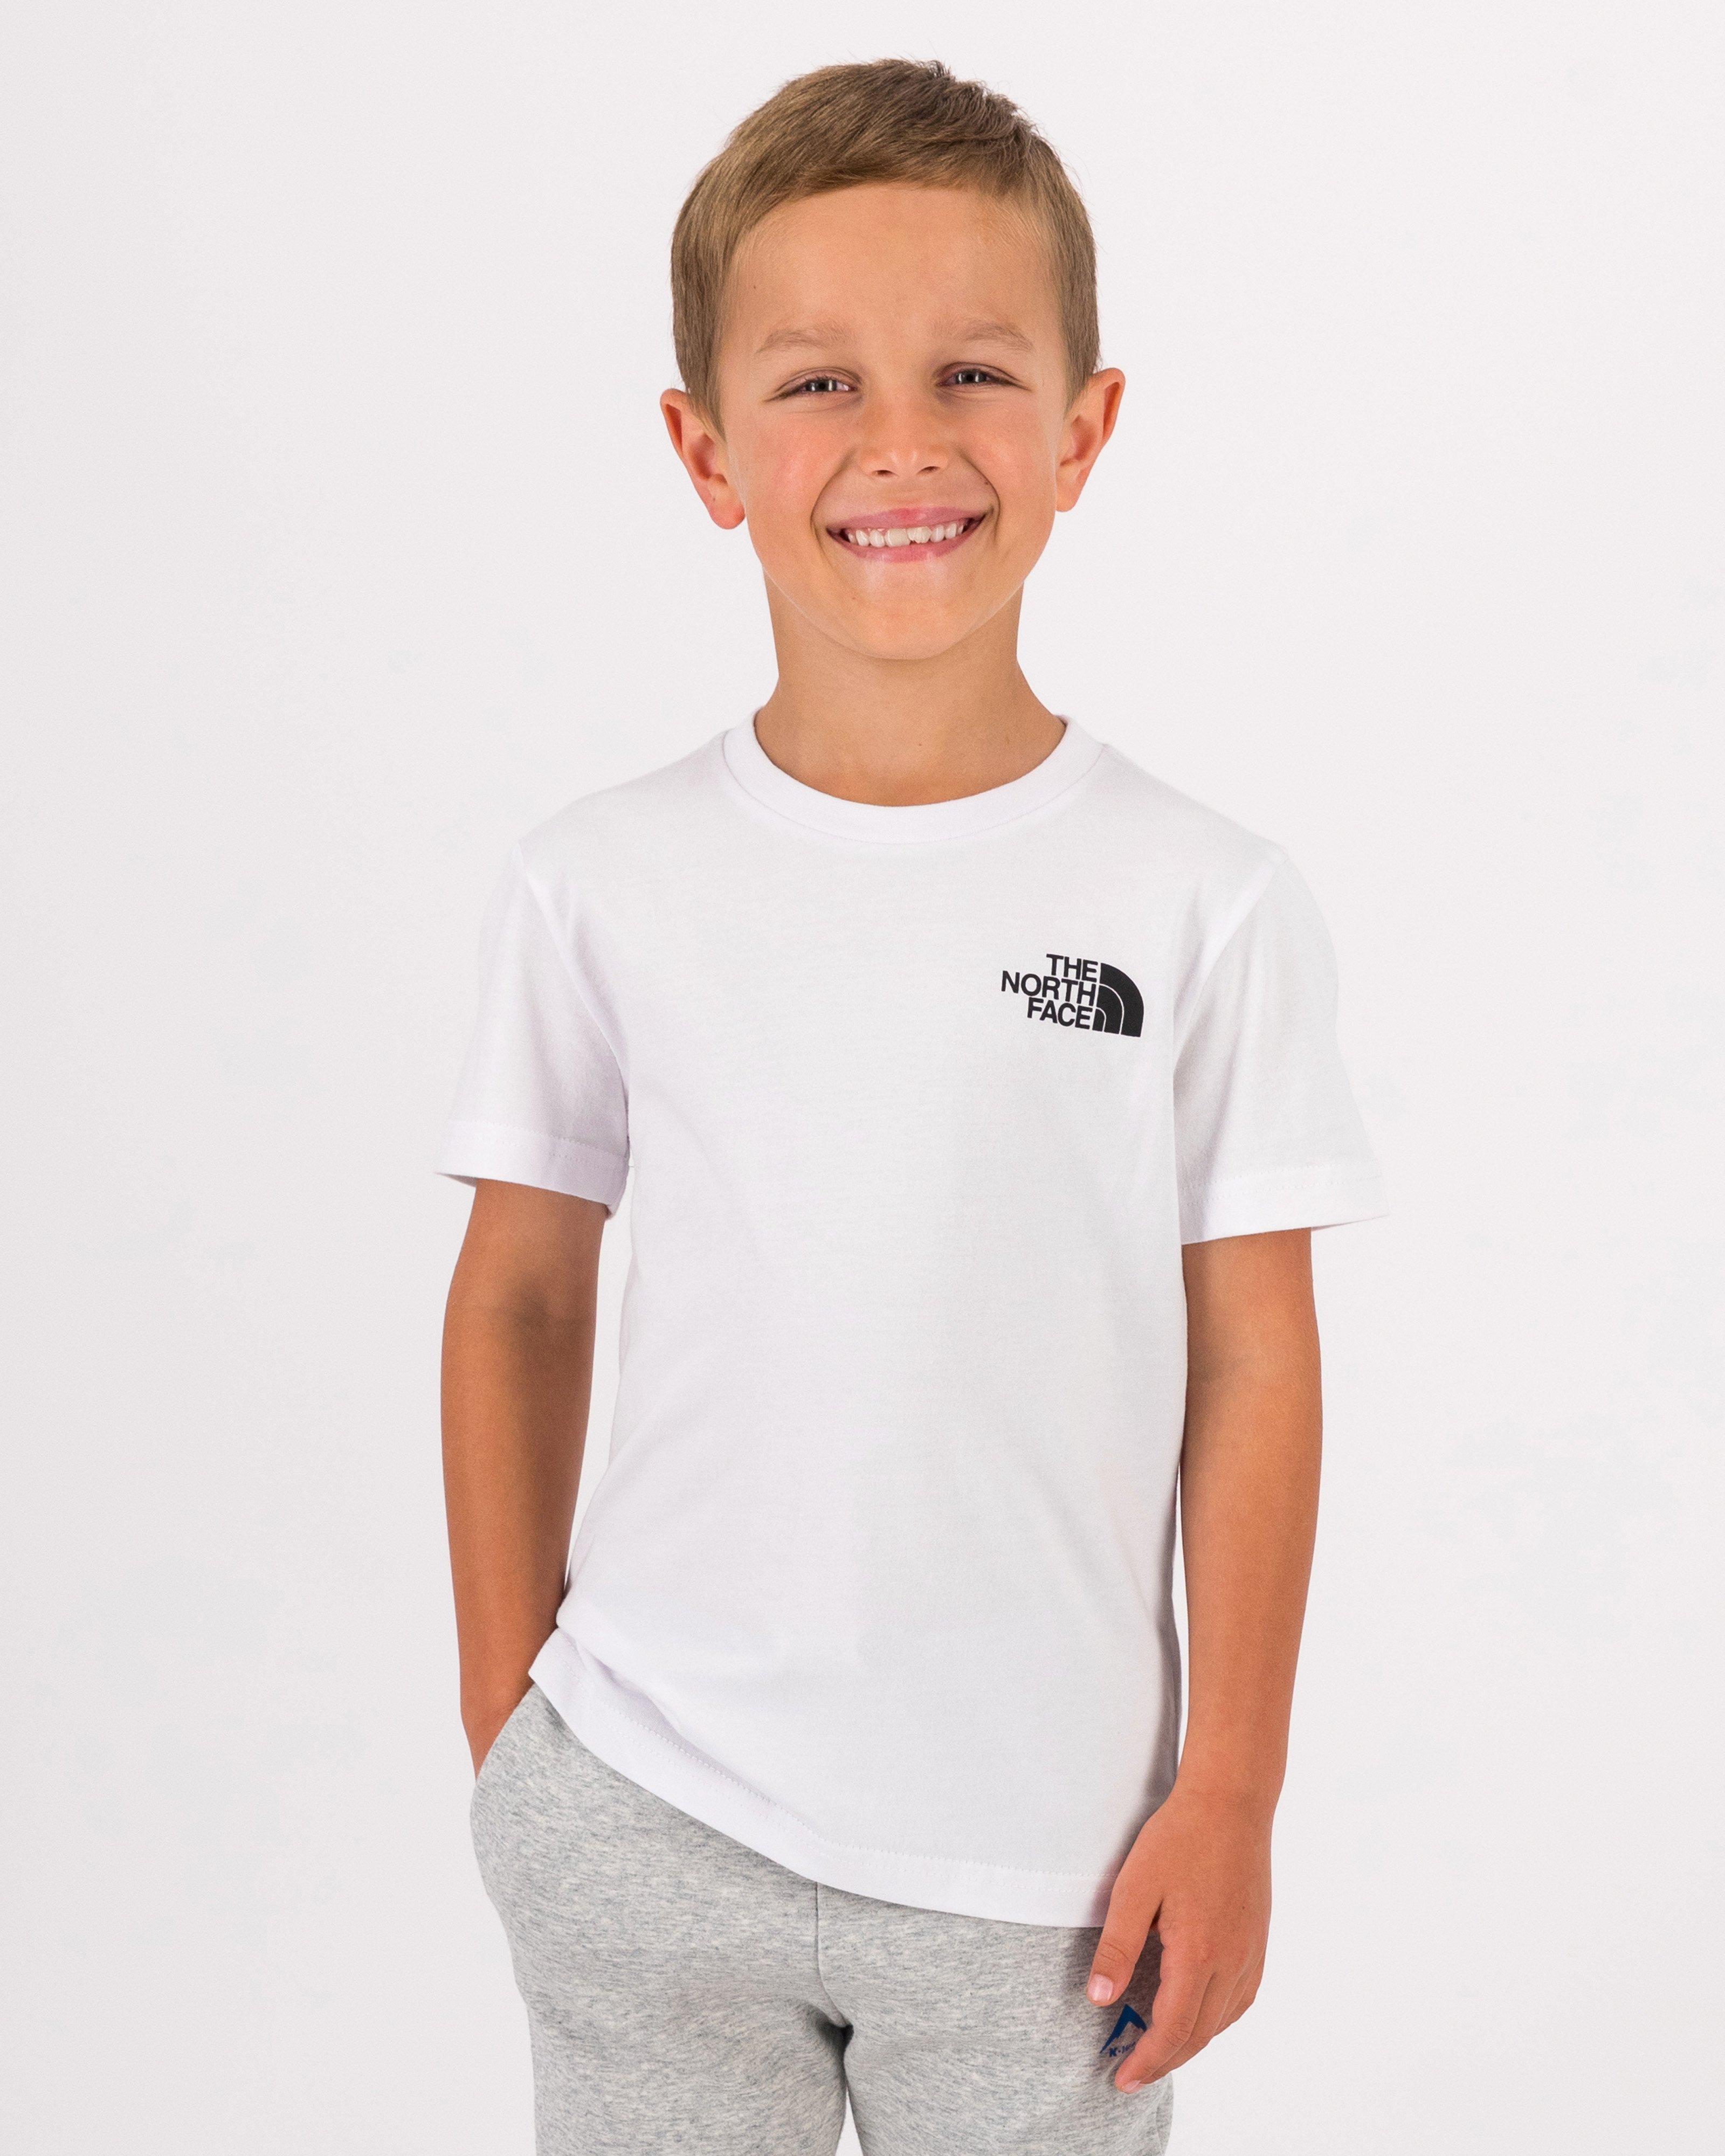 The North Face Youth Boys’ Simple Dome Cotton T-shirt -  White